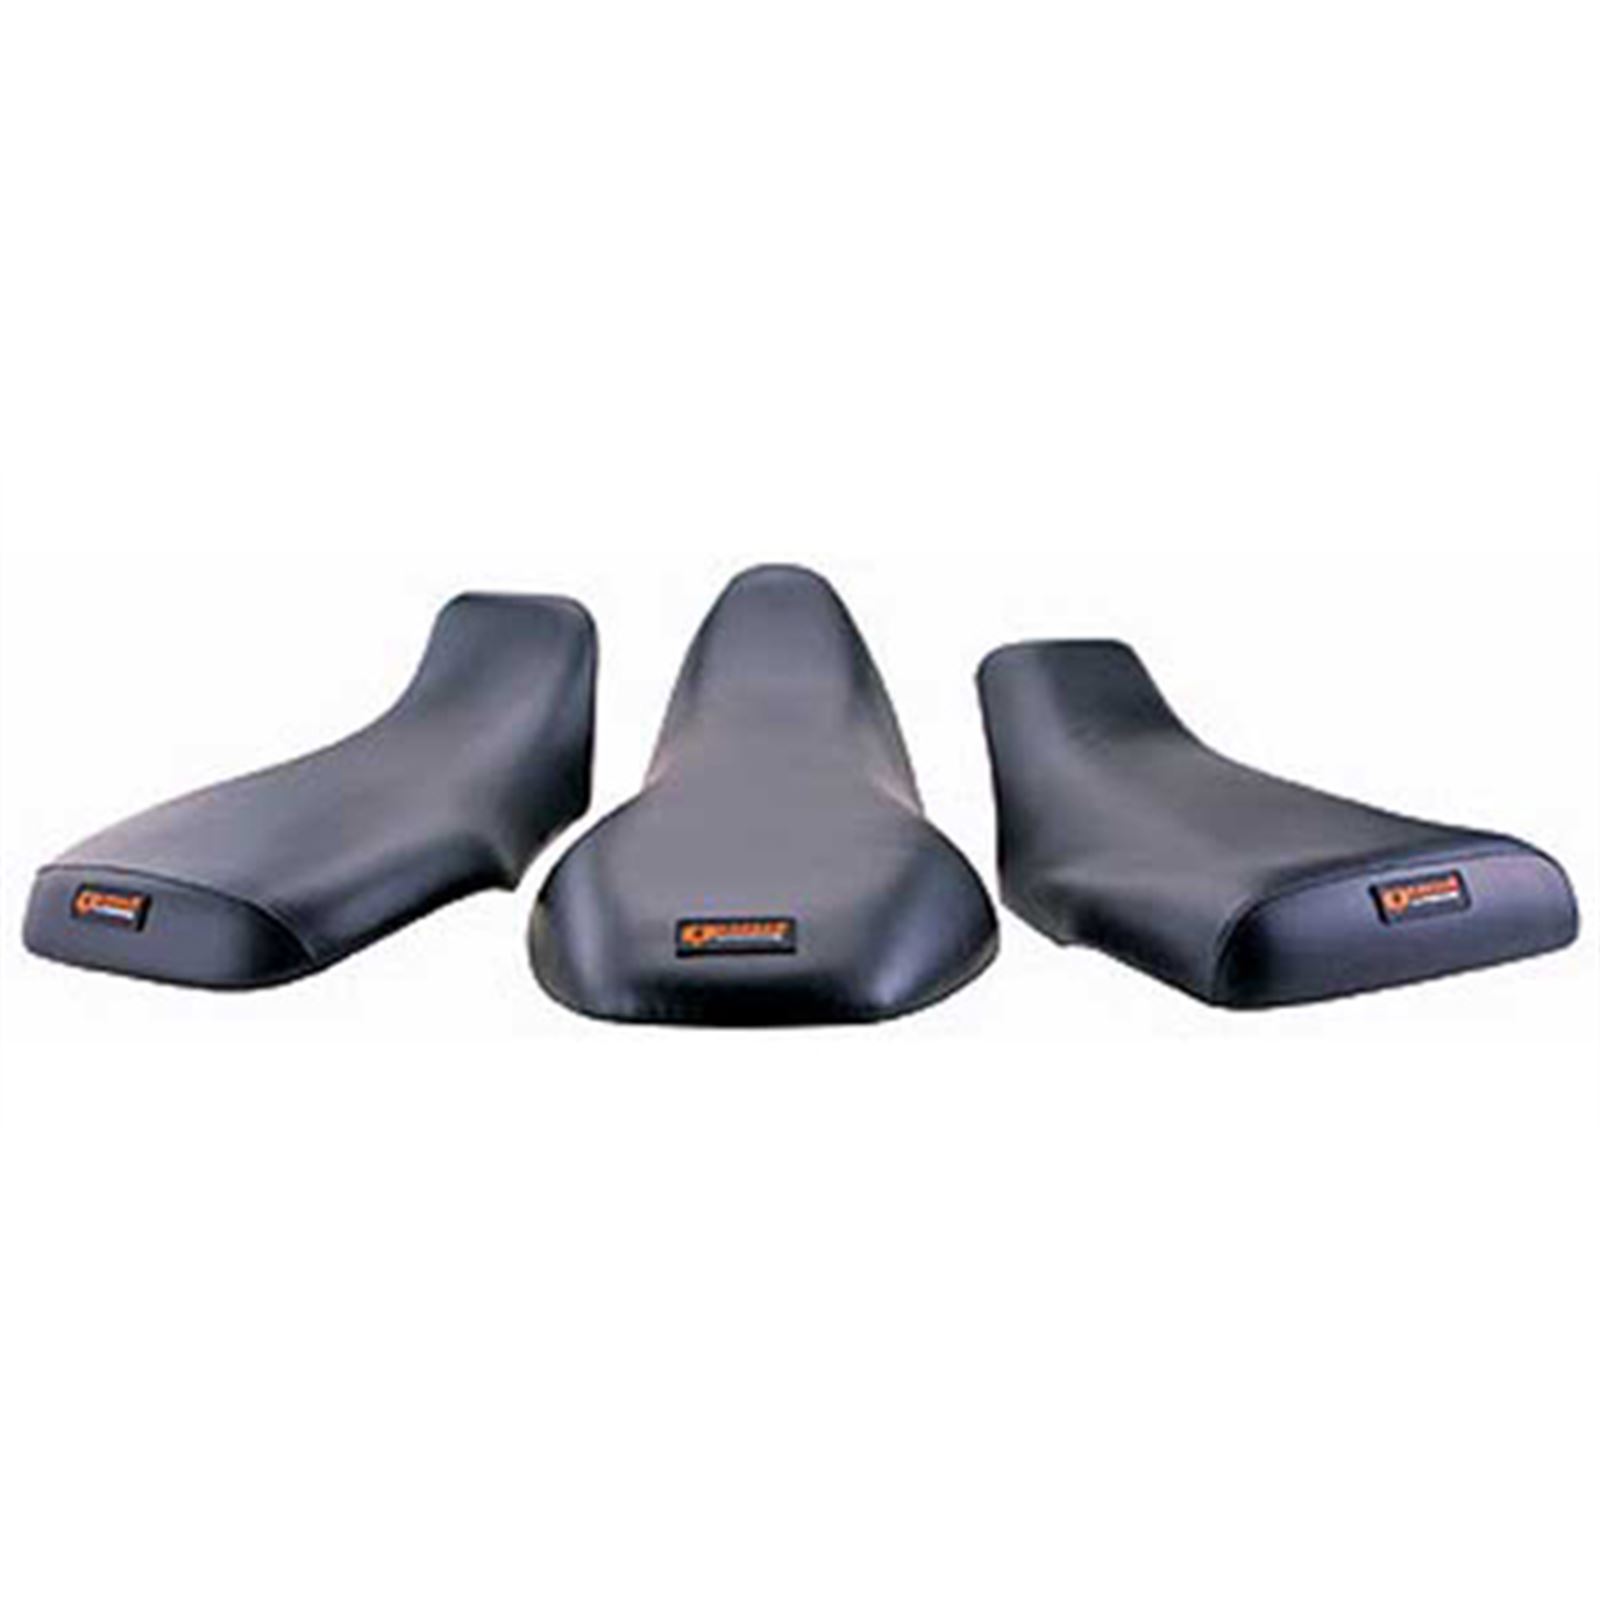 Quad Works Standard Seat Cover